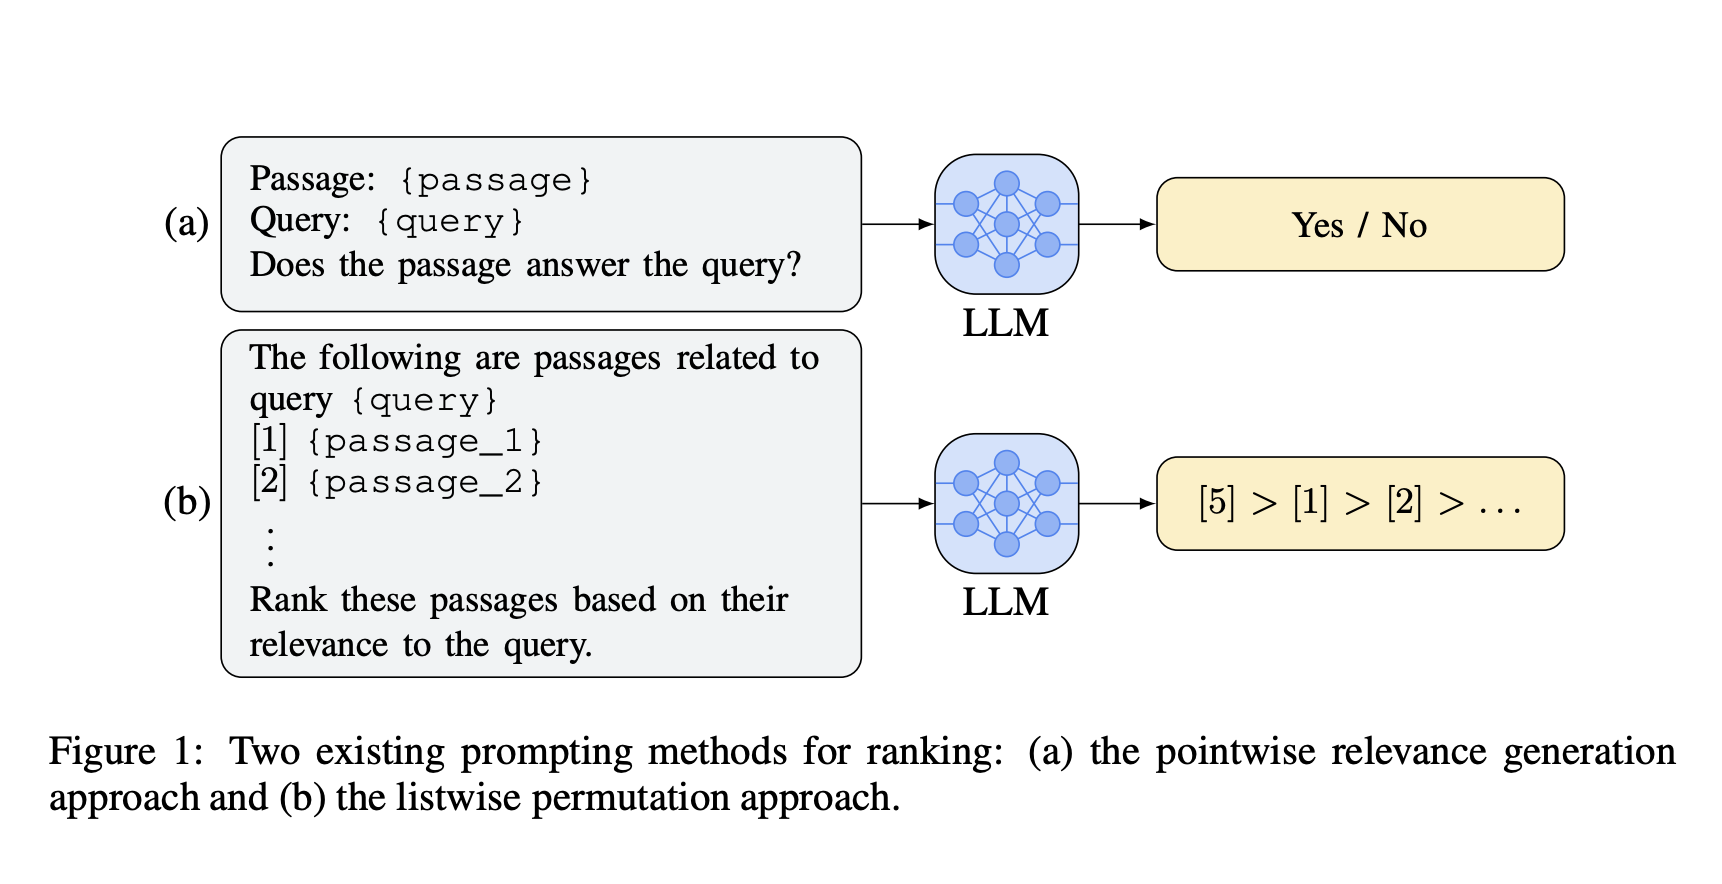 A New Google AI Research Proposes to Significantly Reduce the Burden on LLMs by Using a New Technique Called Pairwise Ranking Prompting (PRP)